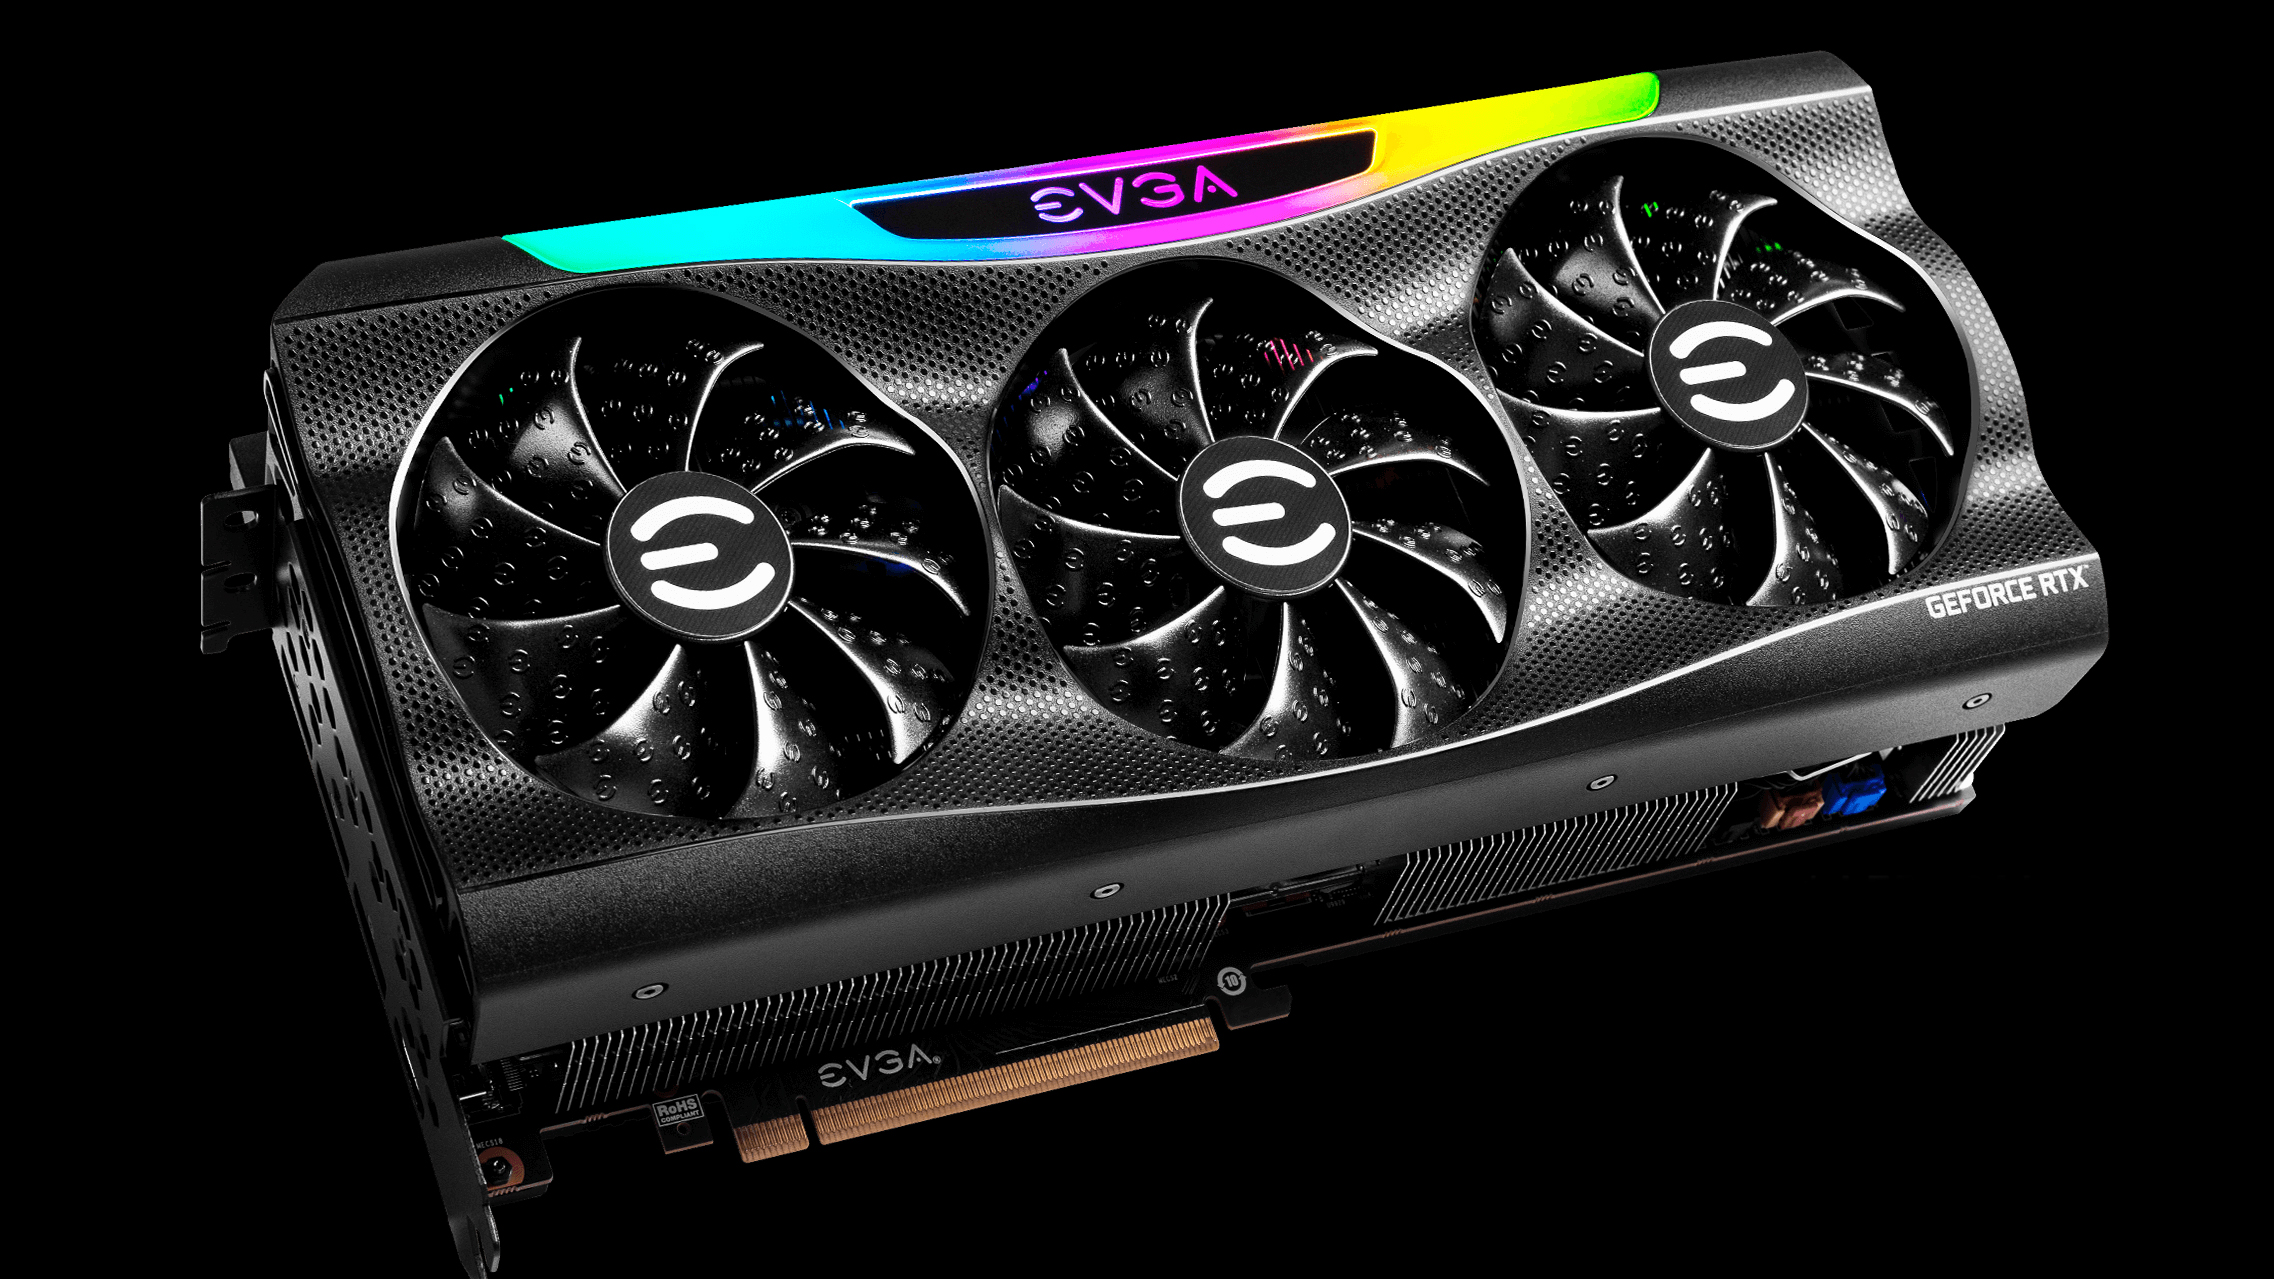 EVGA is reportedly so sick of working with Nvidia that it’s going to stop making graphics cards altogether